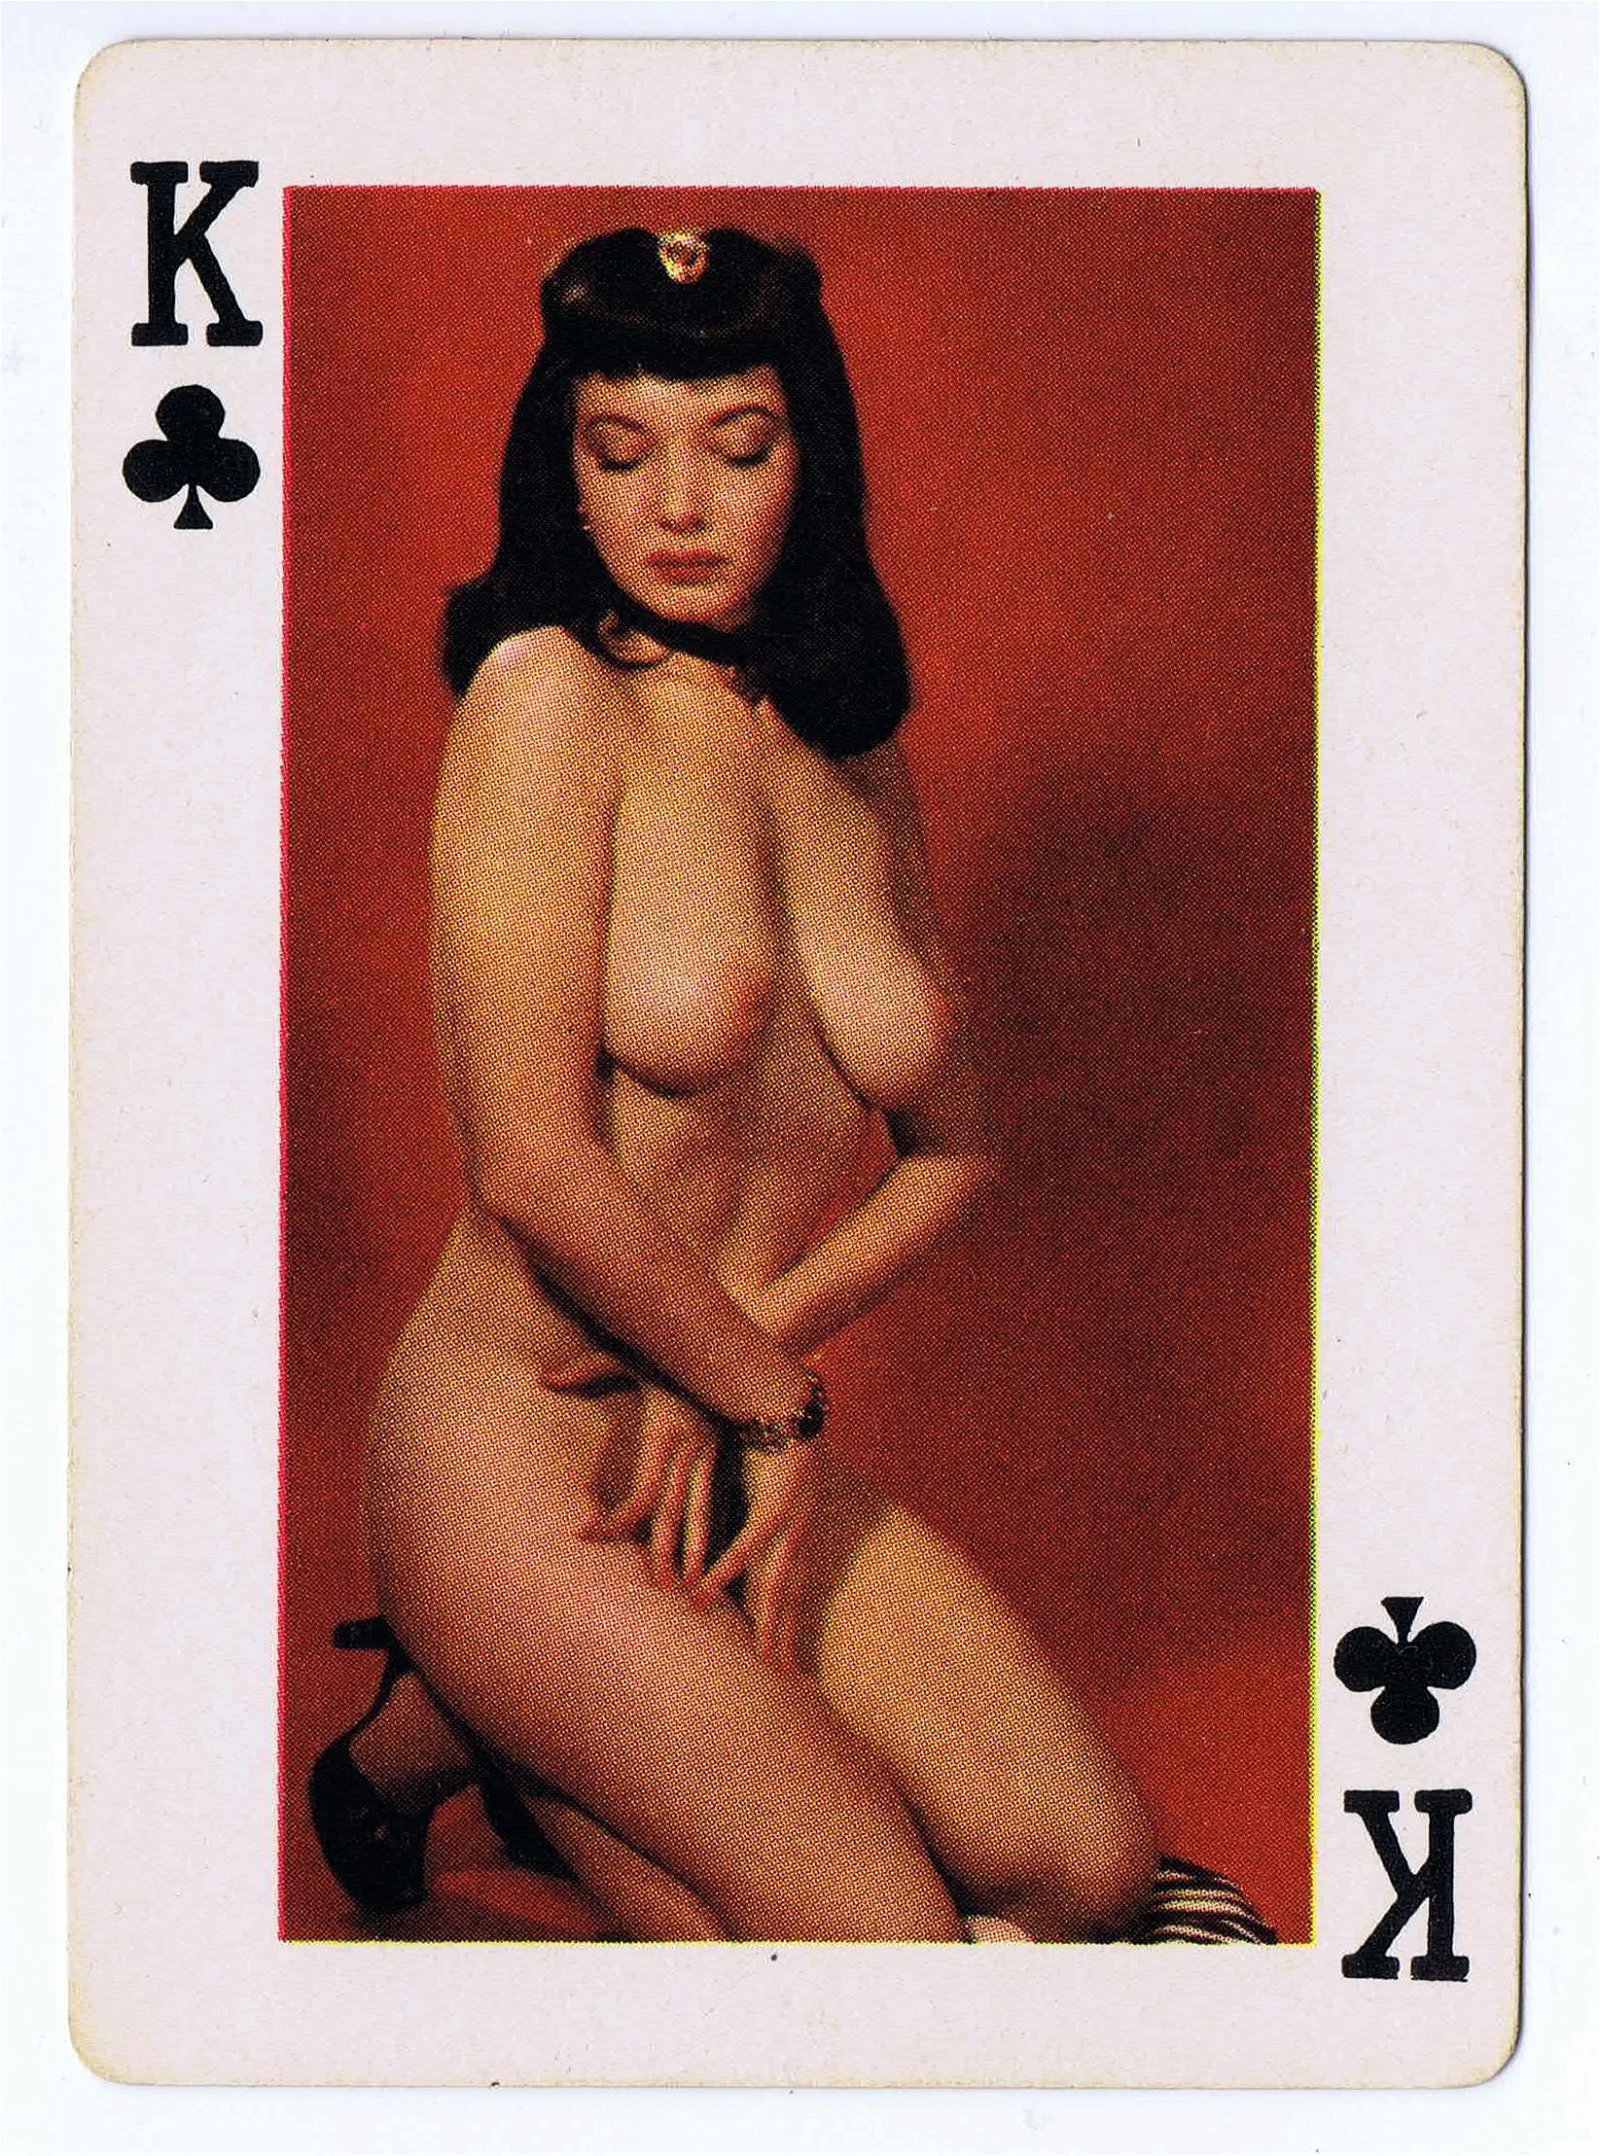 Photo by CRD Larson Art with the username @CRDLarson, who is a verified user,  September 2, 2019 at 3:10 PM. The post is about the topic Nude Playing Cards and the text says 'King of Clubs

From deck titled 'Fifty-Two Art Studies' by the Novelties Manufacturing and Sales Corp, St. Louis, MO. Mid 1950s.

#photography #vintagenude #vintageerotica #1950s #retro #pinup #boudoir #burlesque #playingcards #glamour'